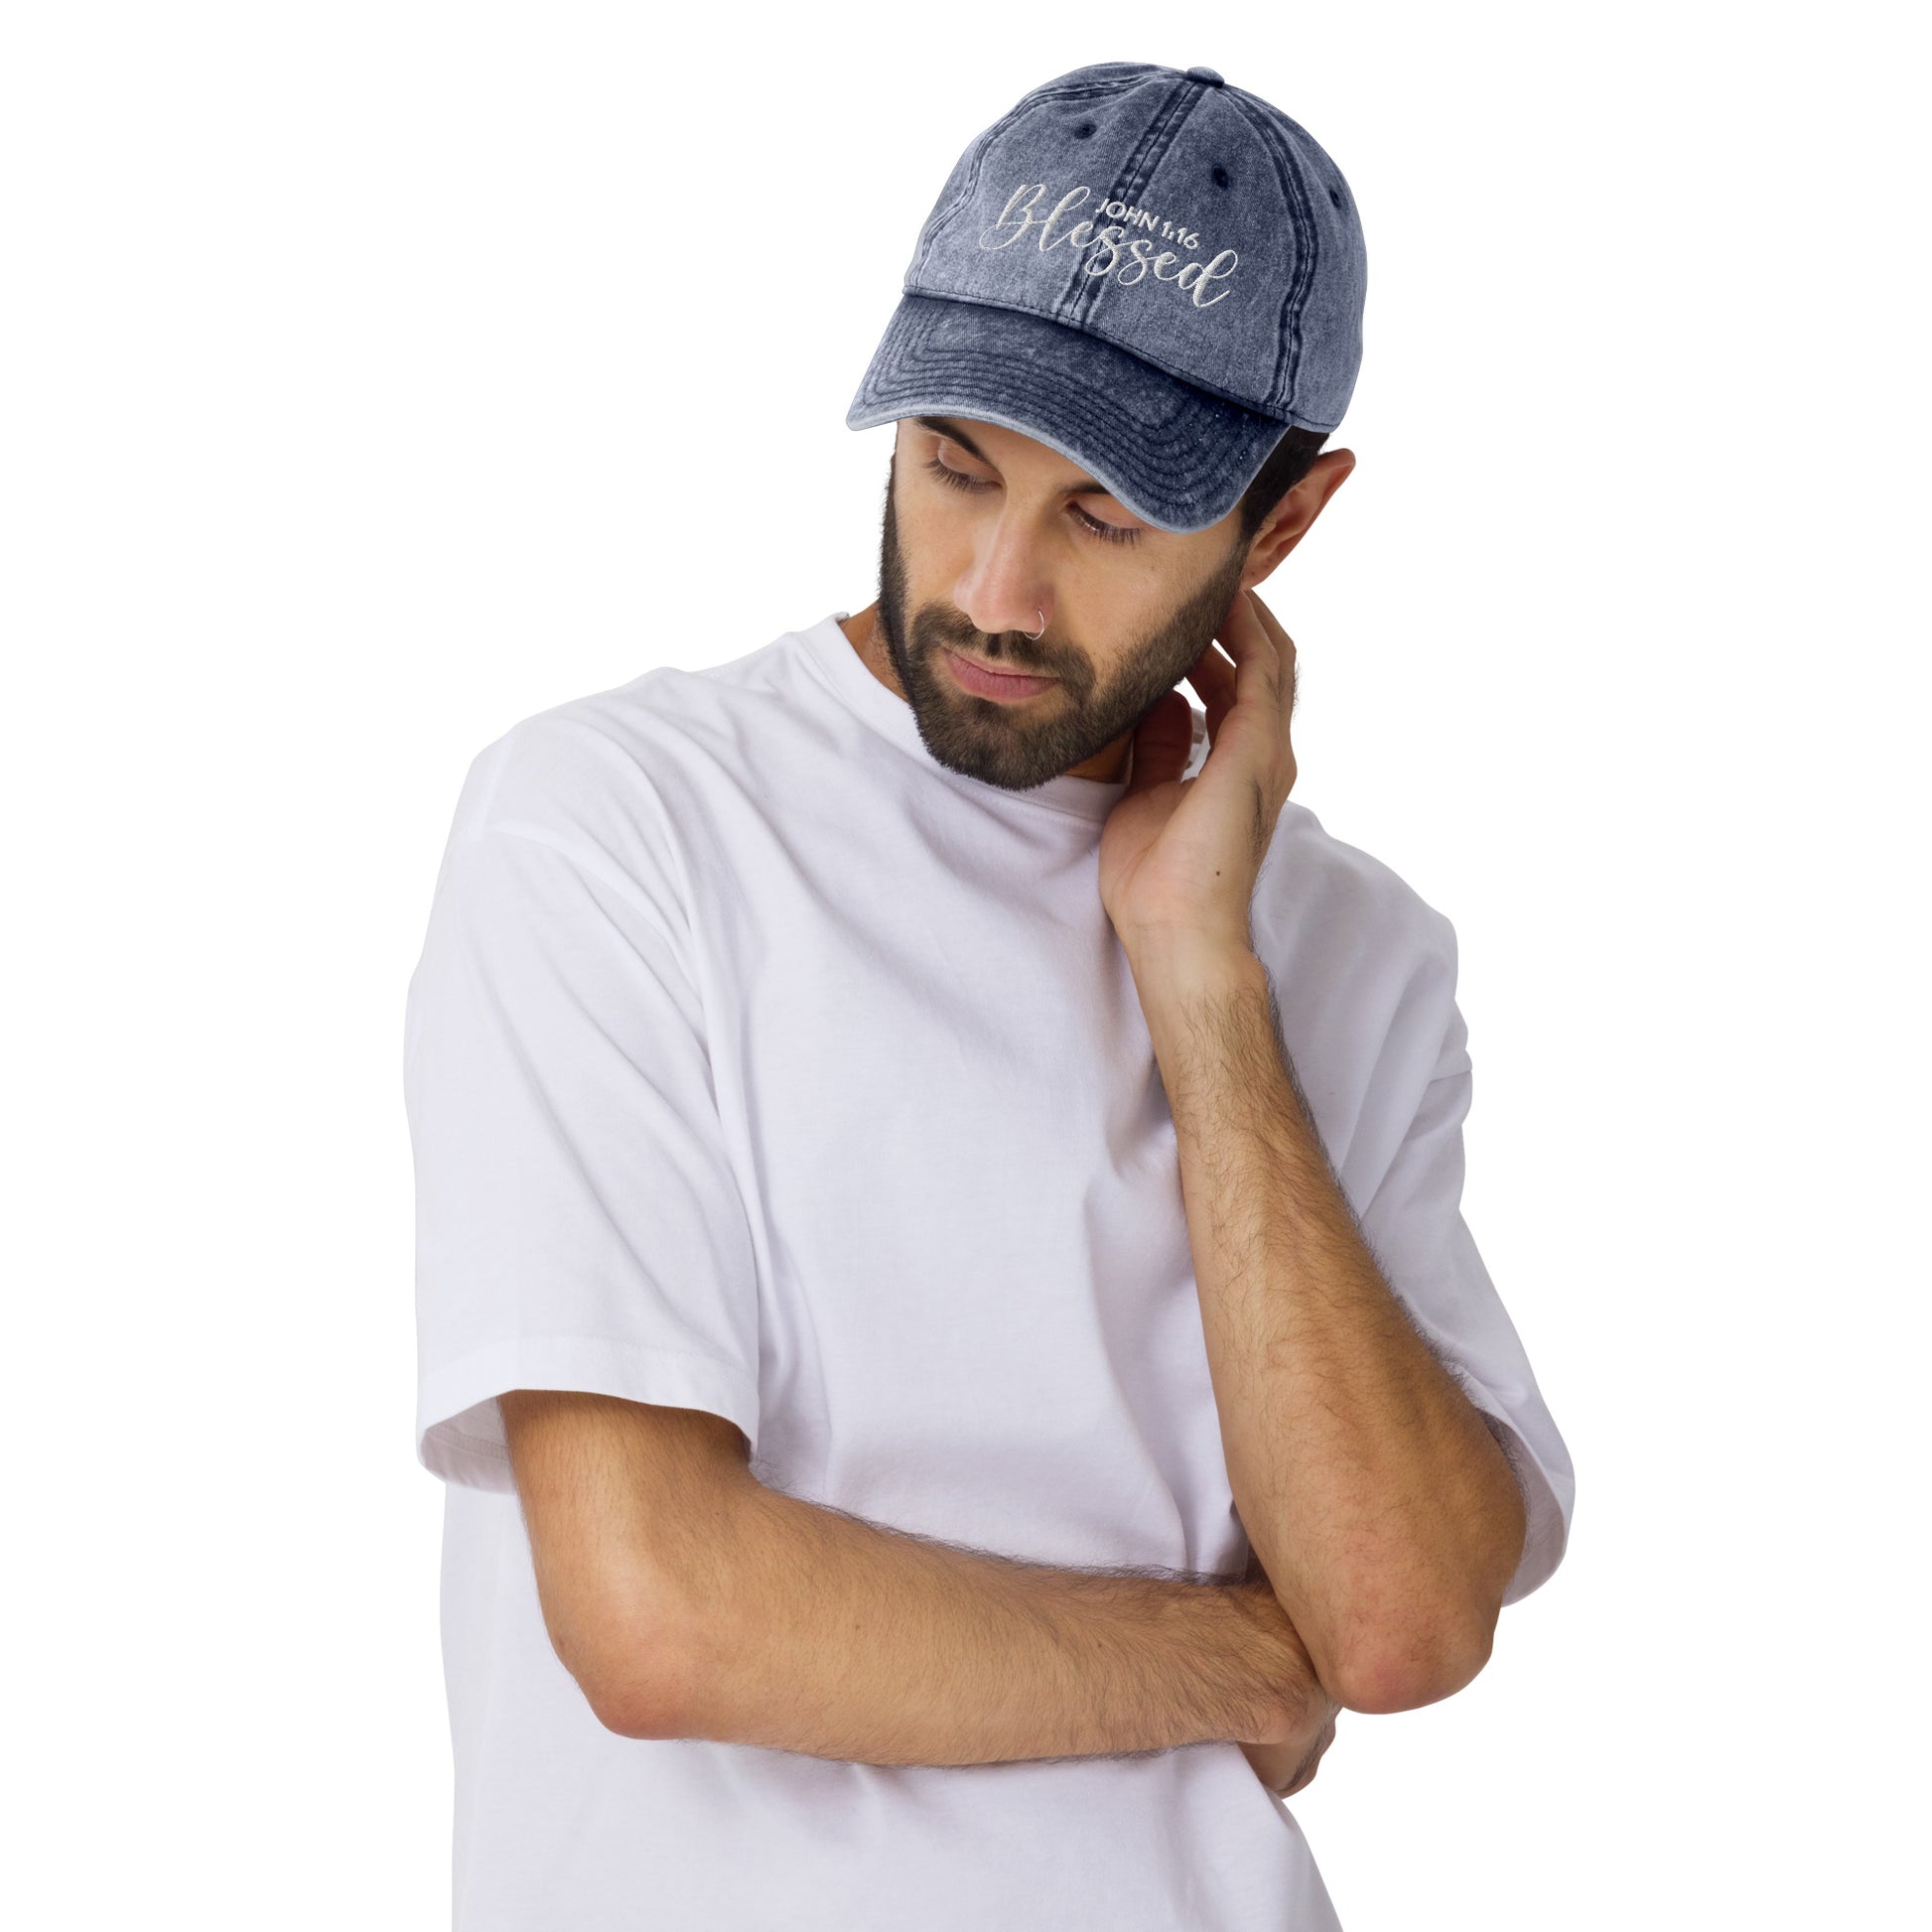 Blessed Vintage Cotton Twill Embroidered Cap - Humble & Faithful Co.